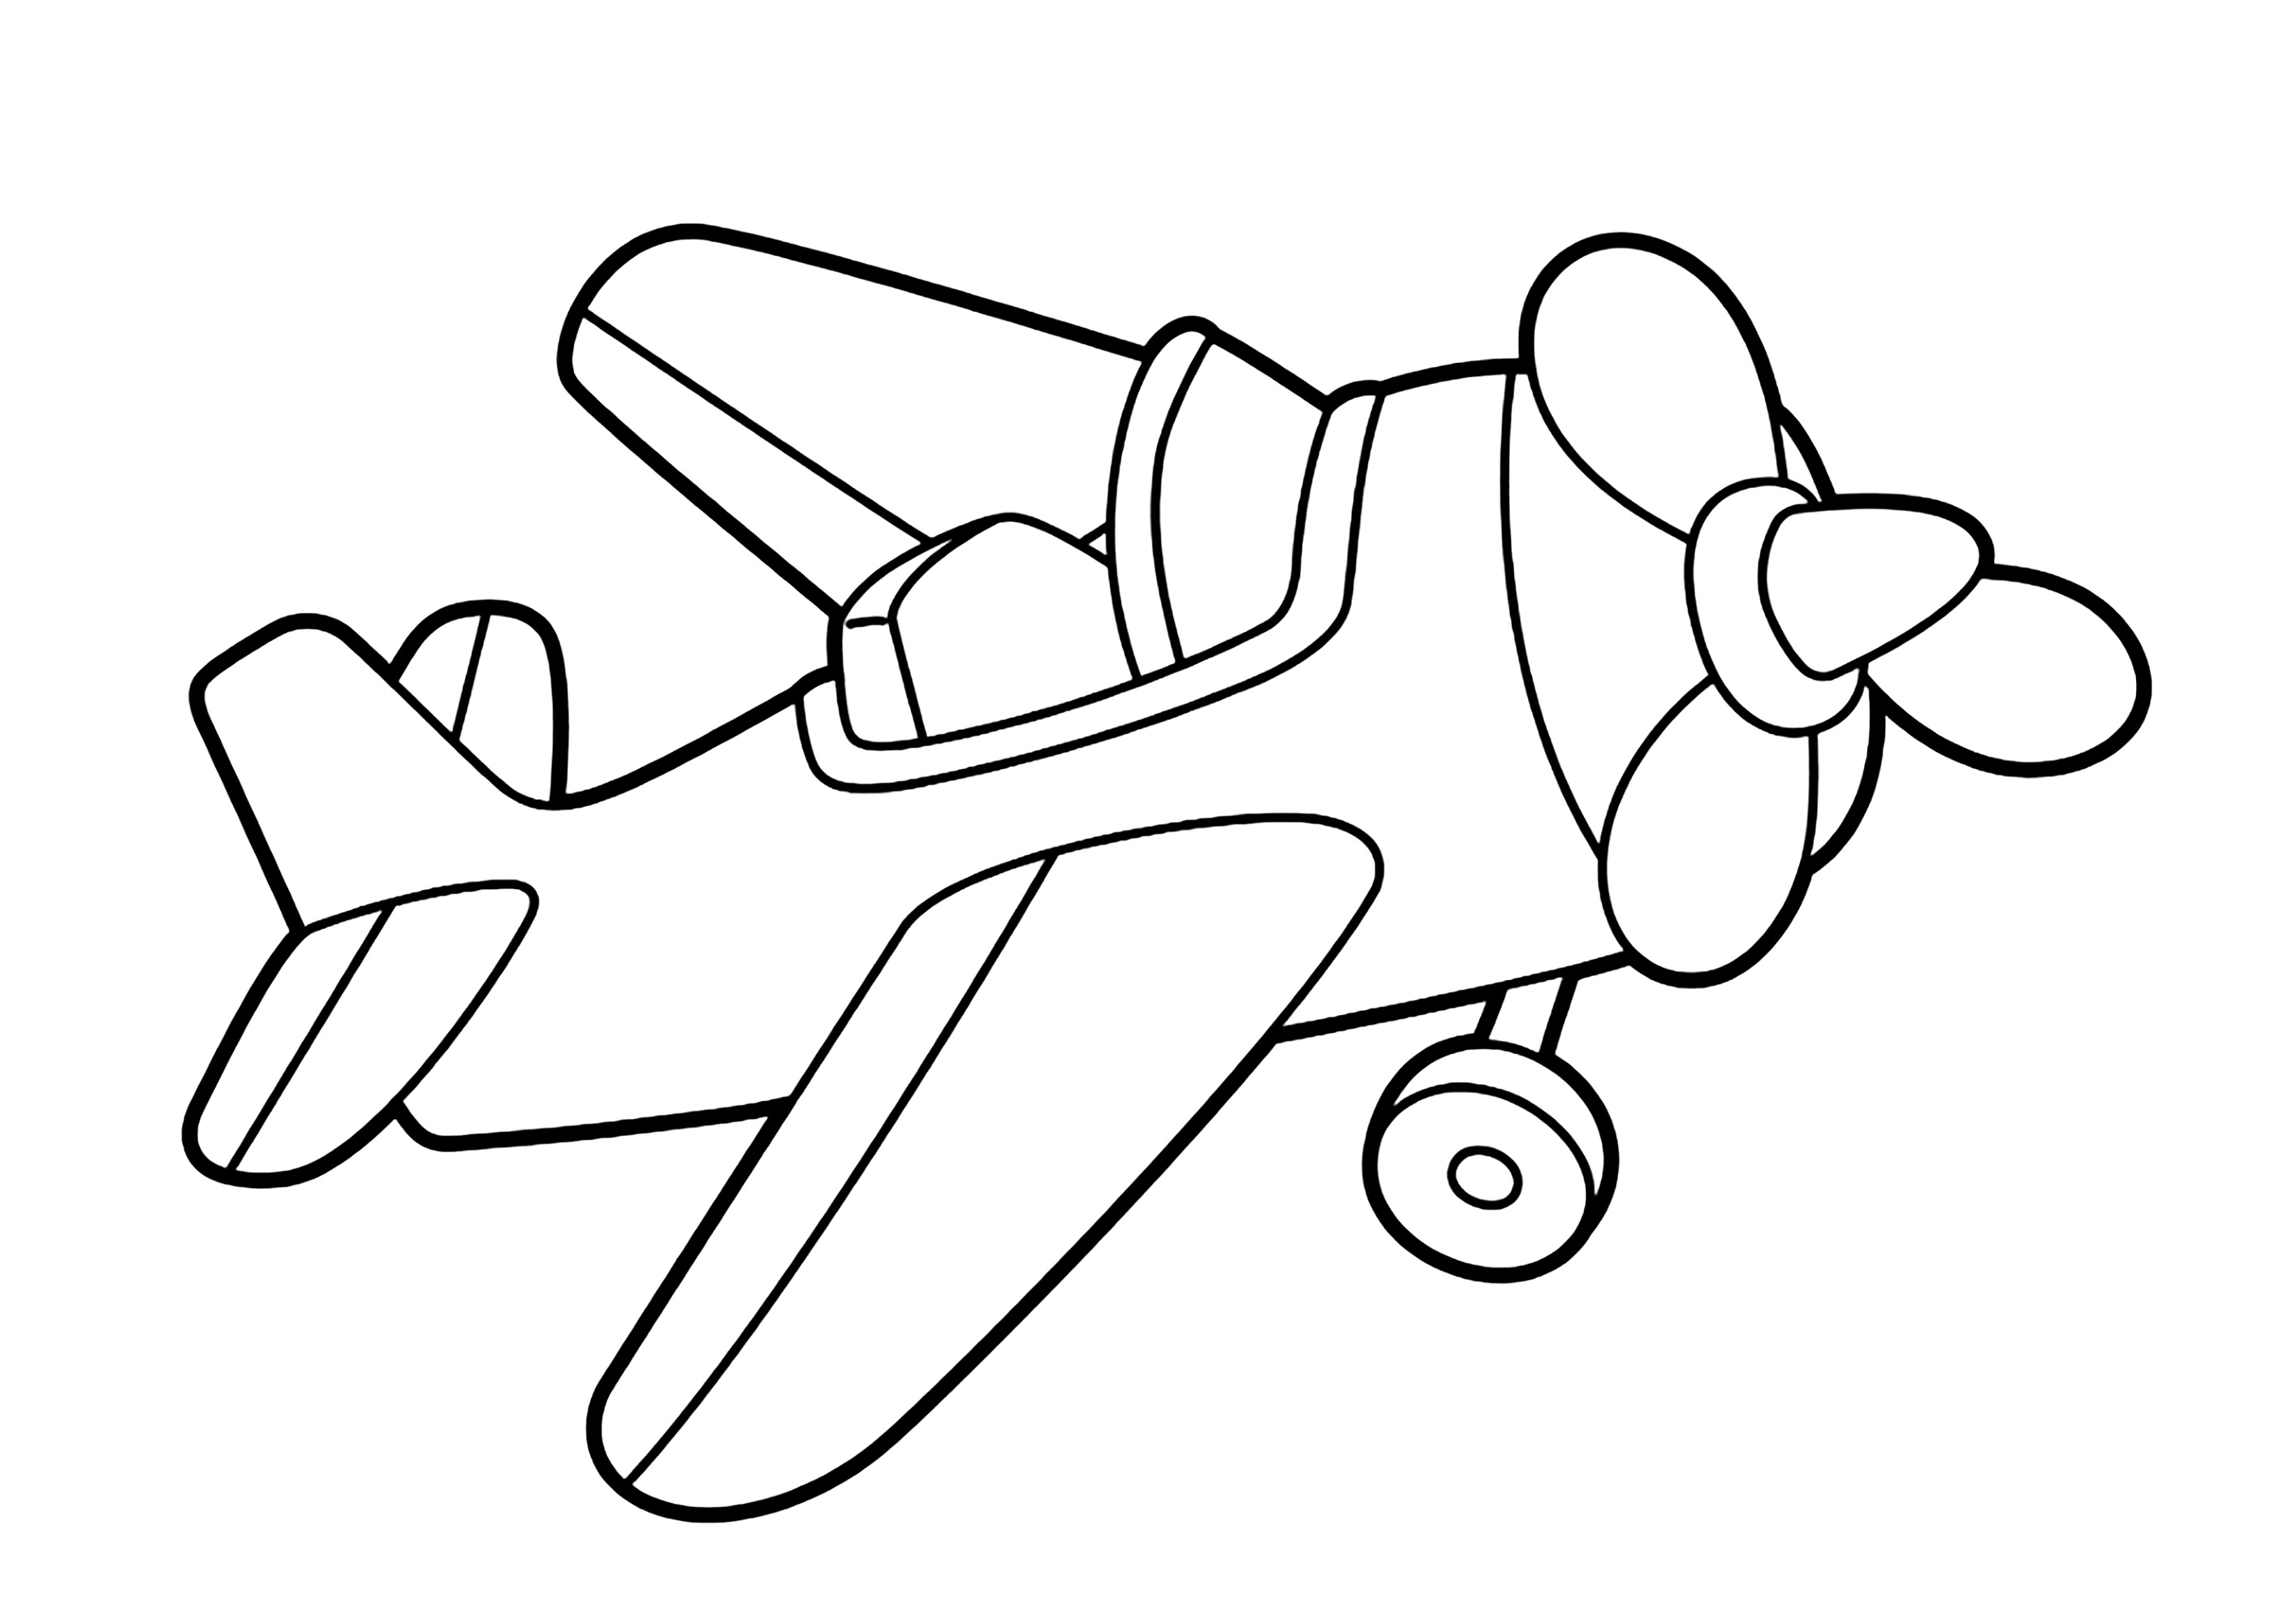 Small single-seater aircraft